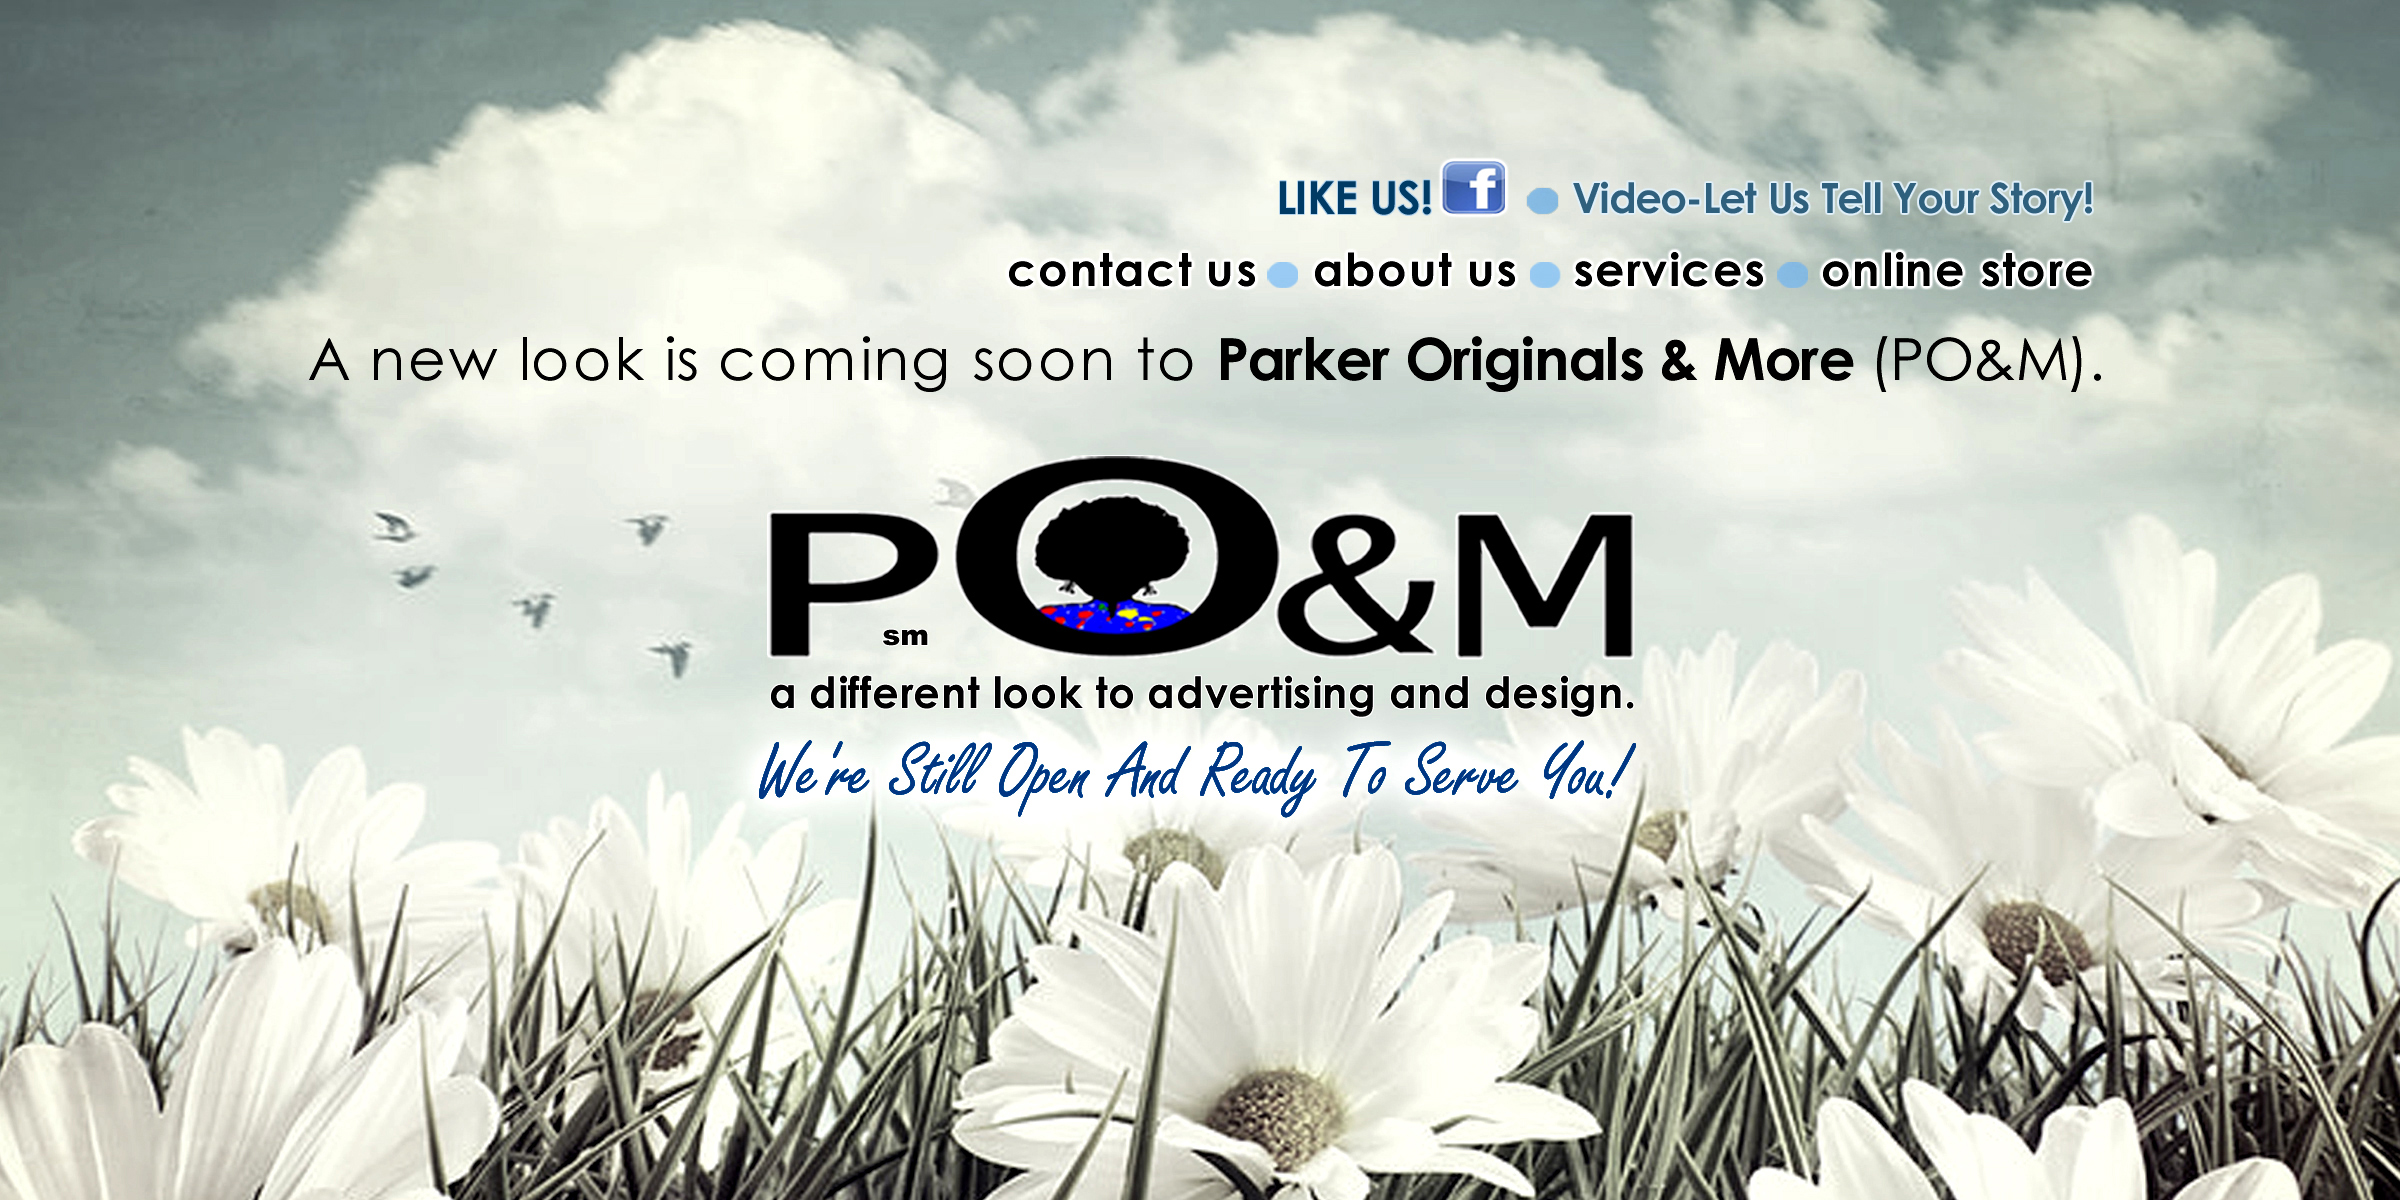 In the world of advertising and marketing there are always deadlines to meet.  Everyday you are searching for new ideas that keep your organization three steps ahead of the competition.  At Parker Originals & More (PO&M), we understand these opportunities and pride ourselves on being your total solution source...from media placement to graphic design.  We are based in Dallas Texas and believe successful branding happens when the message is based on truth ...not Hype.  When you develop your campaign with a long-term vision, knowing each action will build customer loyalty and trust that results in sales.   Yes, in Dallas Texas innovative and effective marketing can be affordable.  Parker Originals & More (PO&M) strives everyday to be one of the advertising agencies that makes this statement true. We take care of our clients...providing service first...during and after the project is completed.